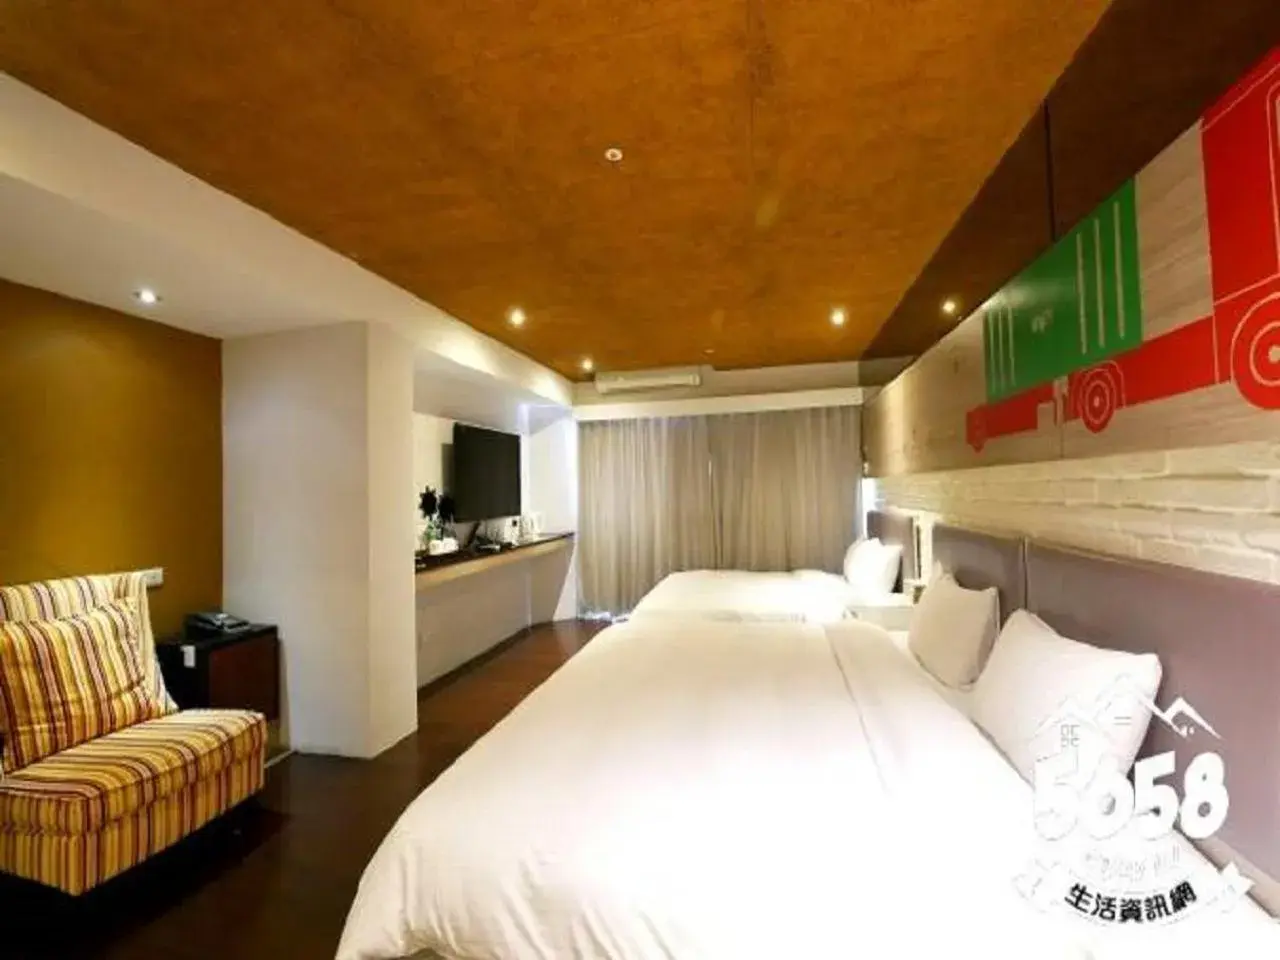 Bed in R8 Eco Hotel